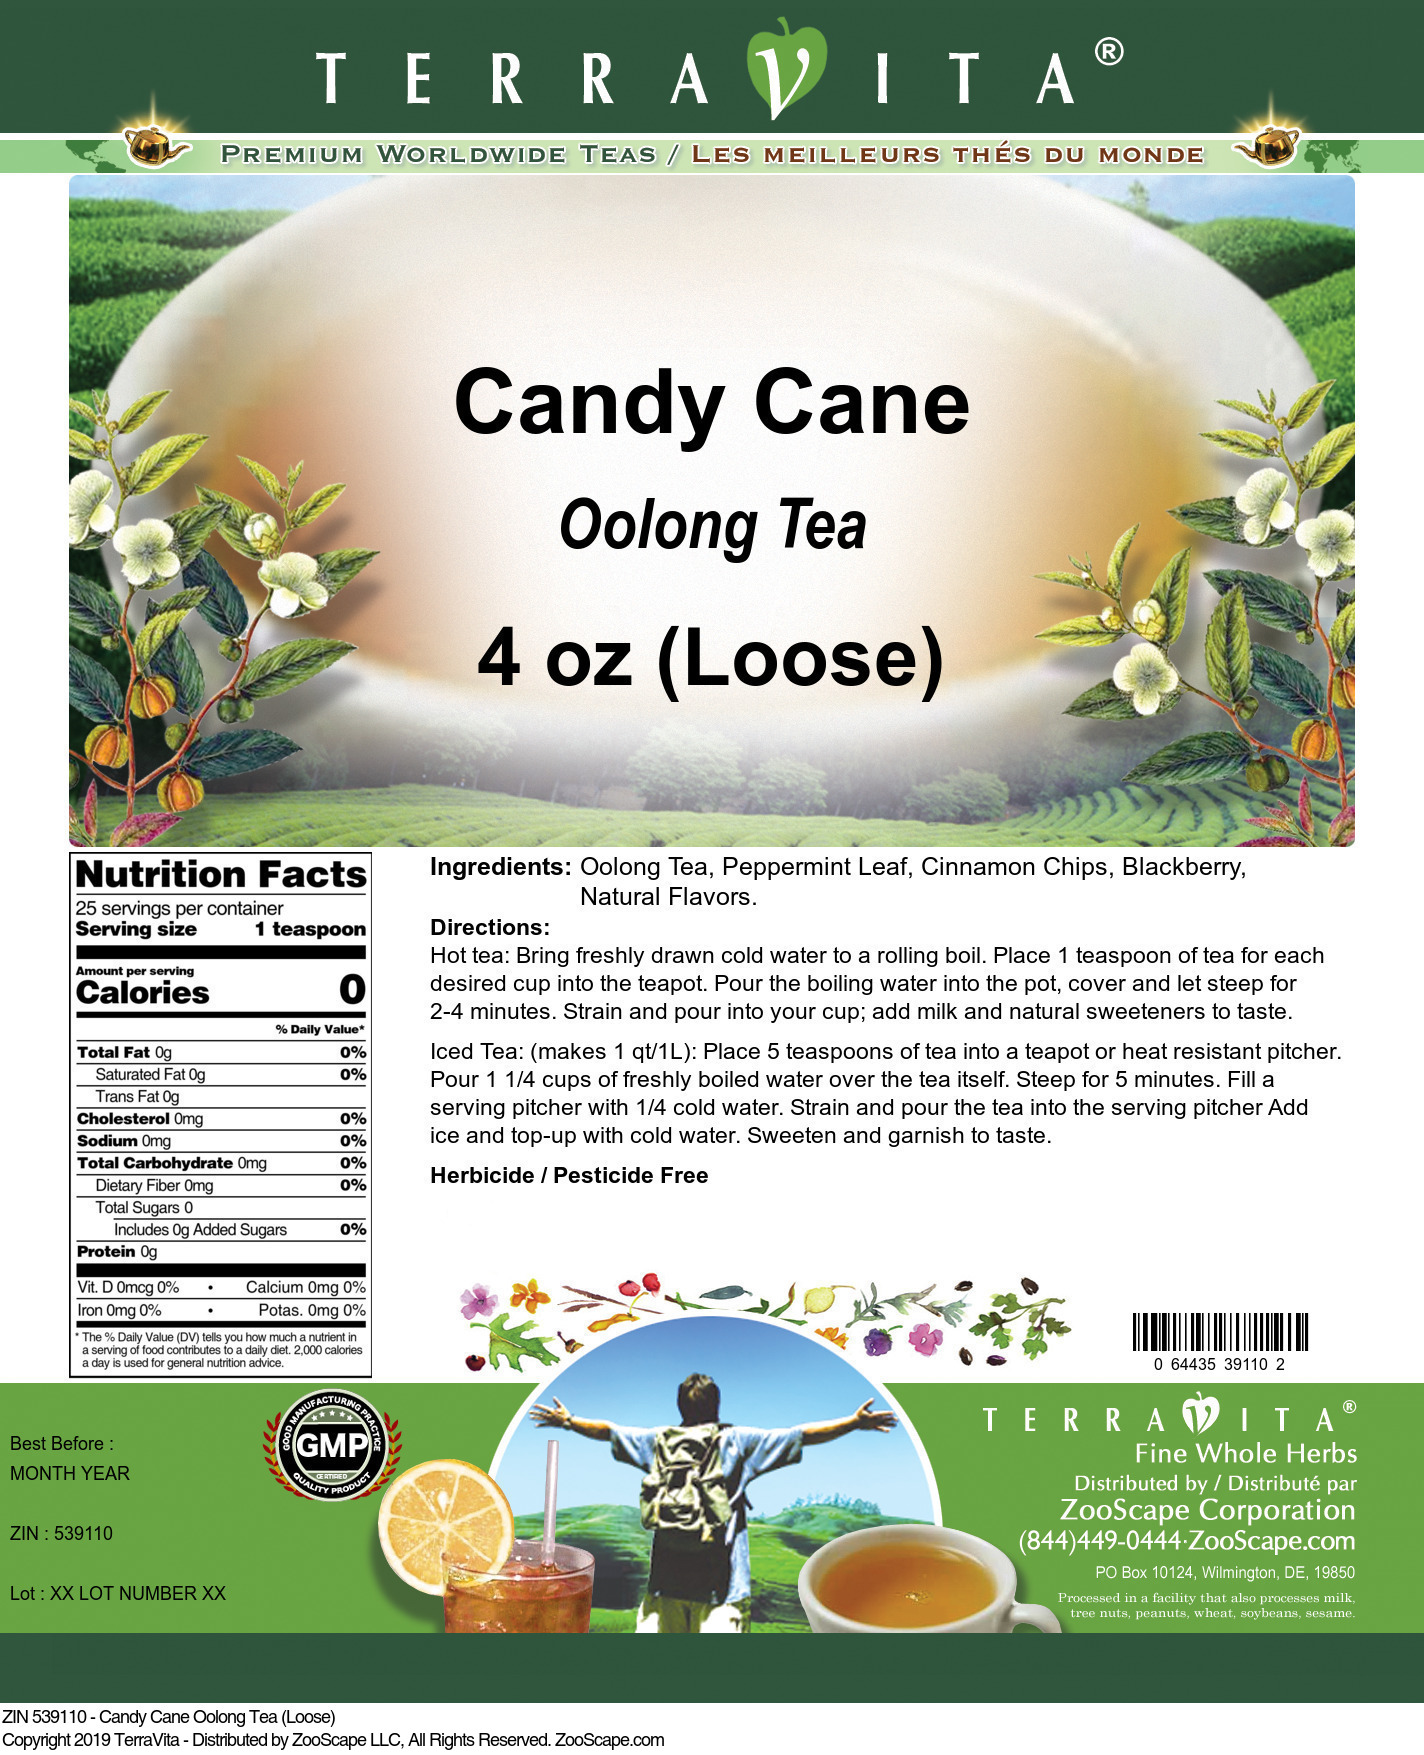 Candy Cane Oolong Tea (Loose) - Label